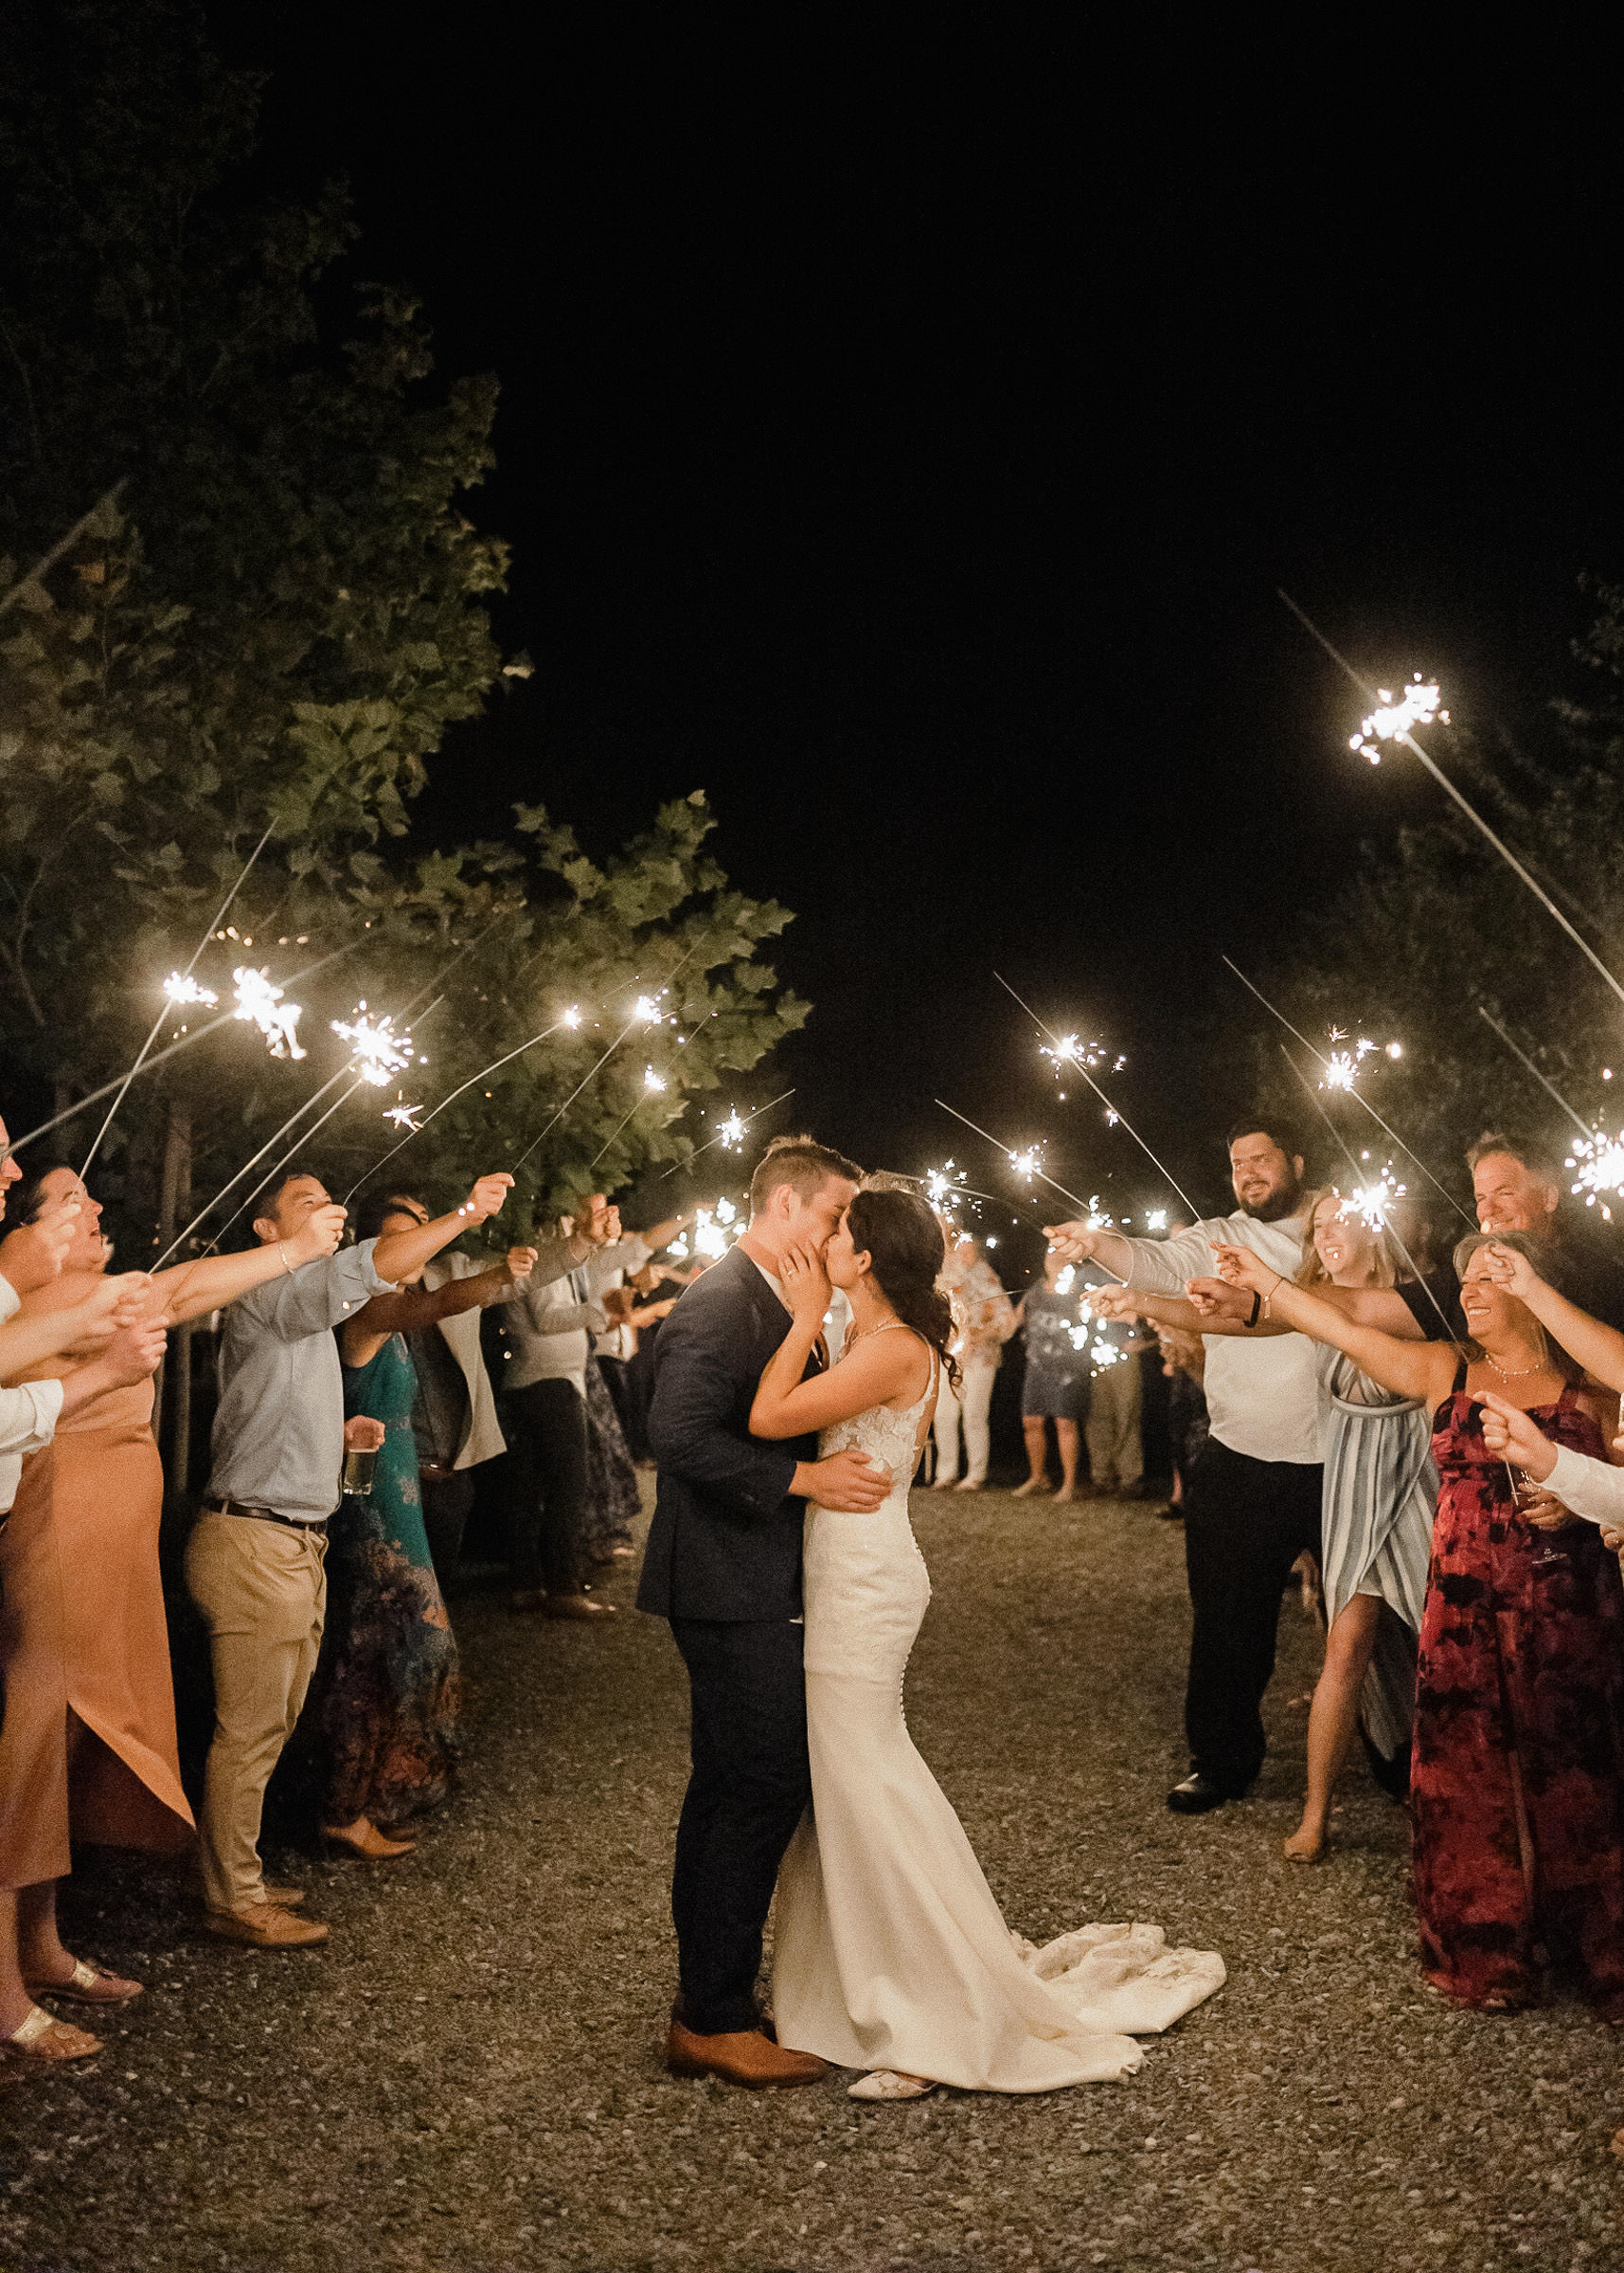 Bride and groom kiss, surrounded by guests forming a tunnel with sparklers